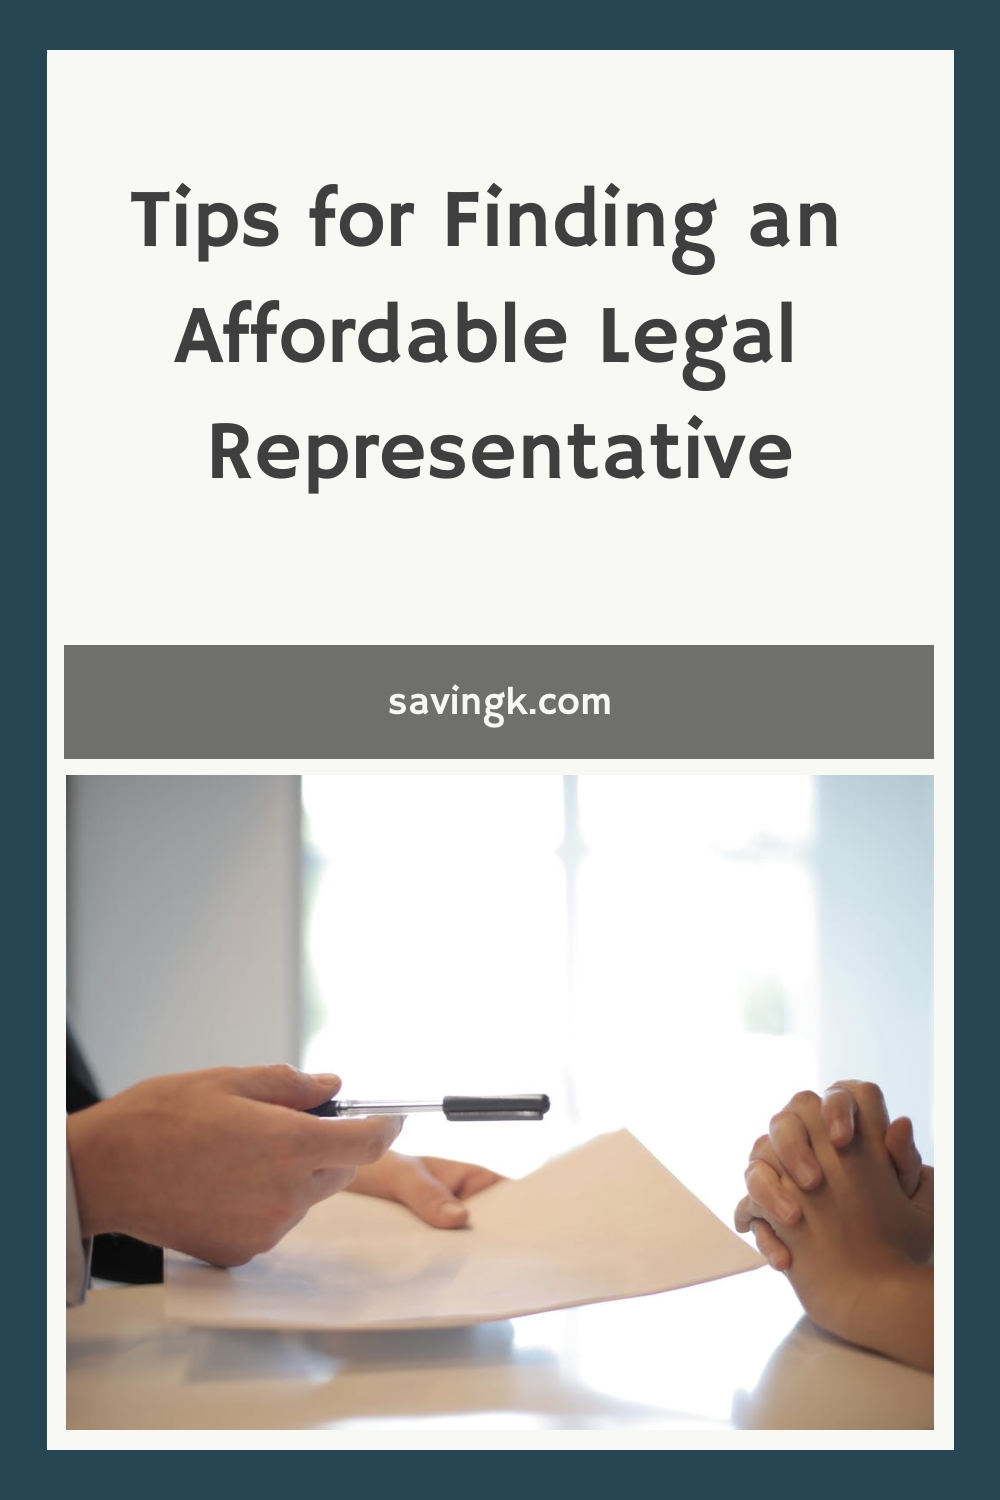 Tips for Finding an Affordable Legal Representative